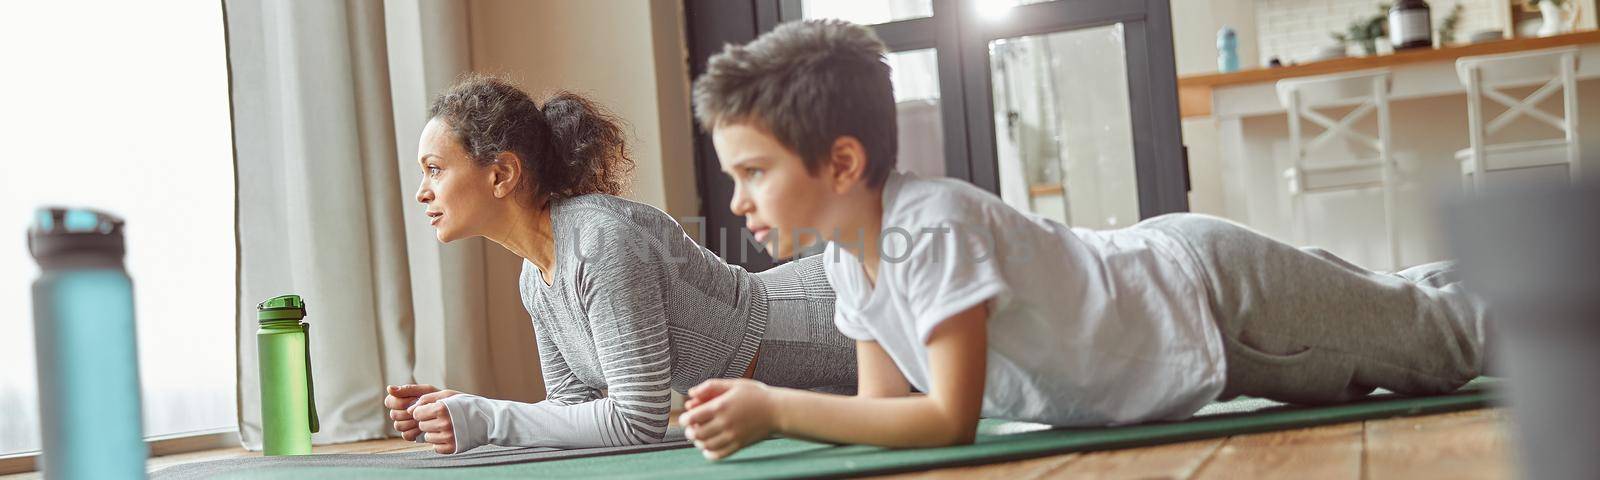 Sporty mom training core with son at home by Yaroslav_astakhov